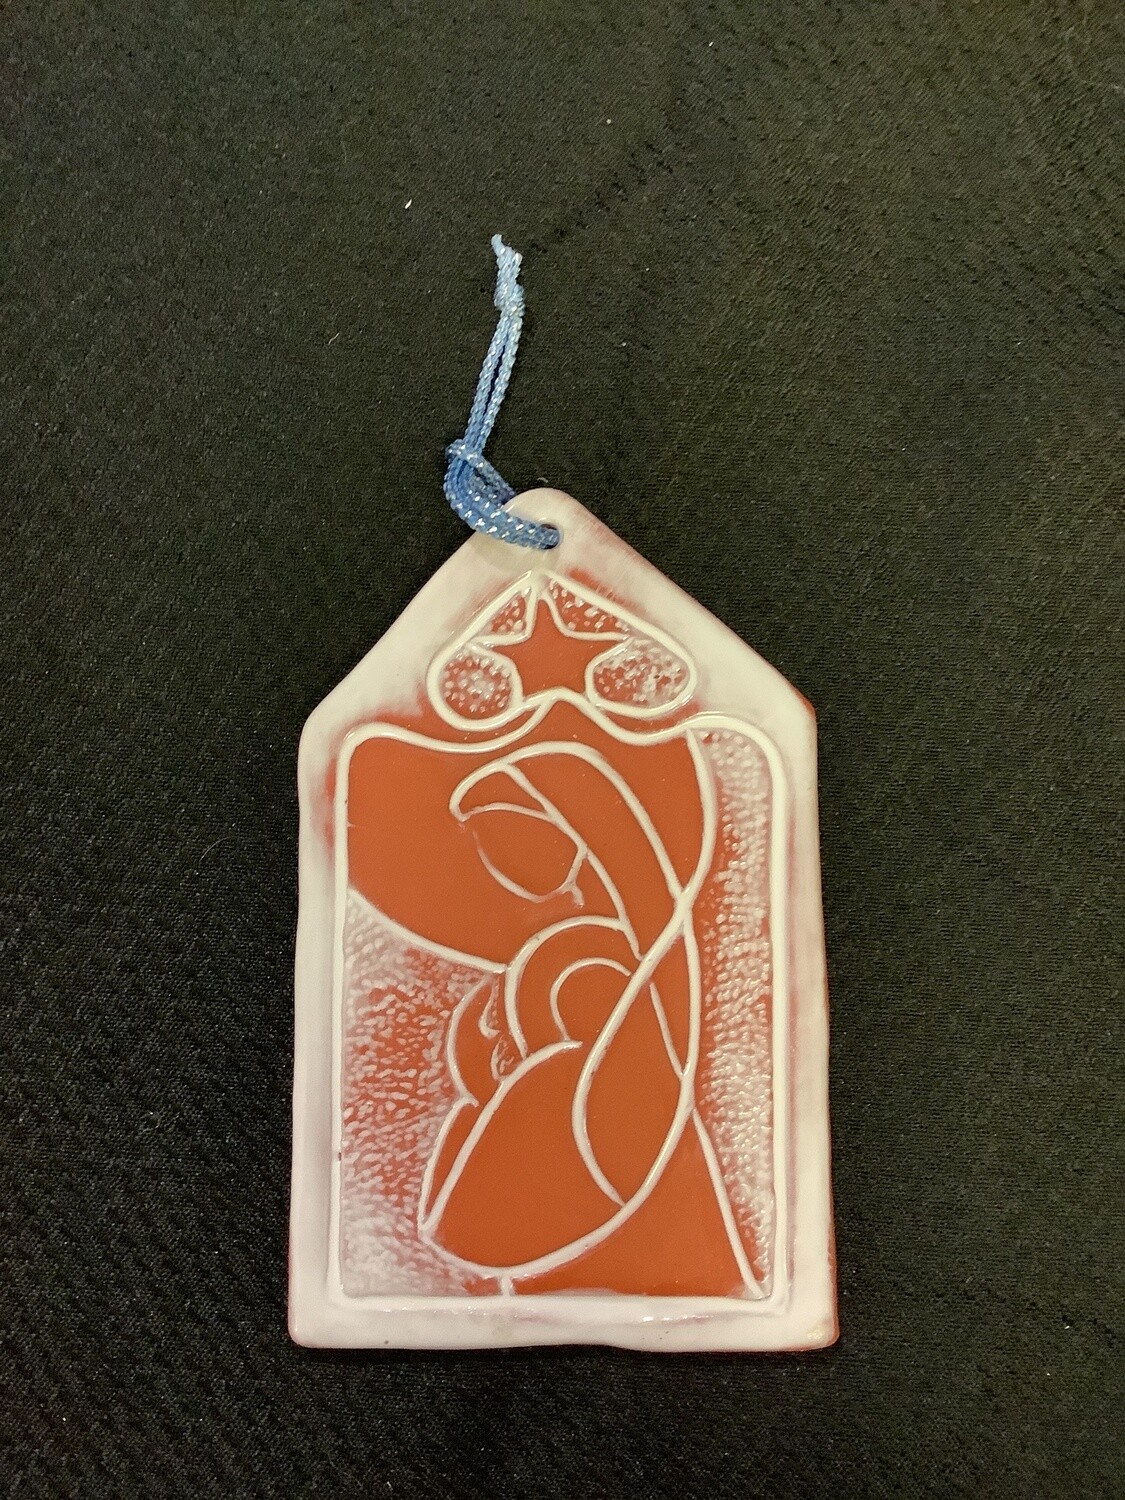 Mary and Child Ornament Tile